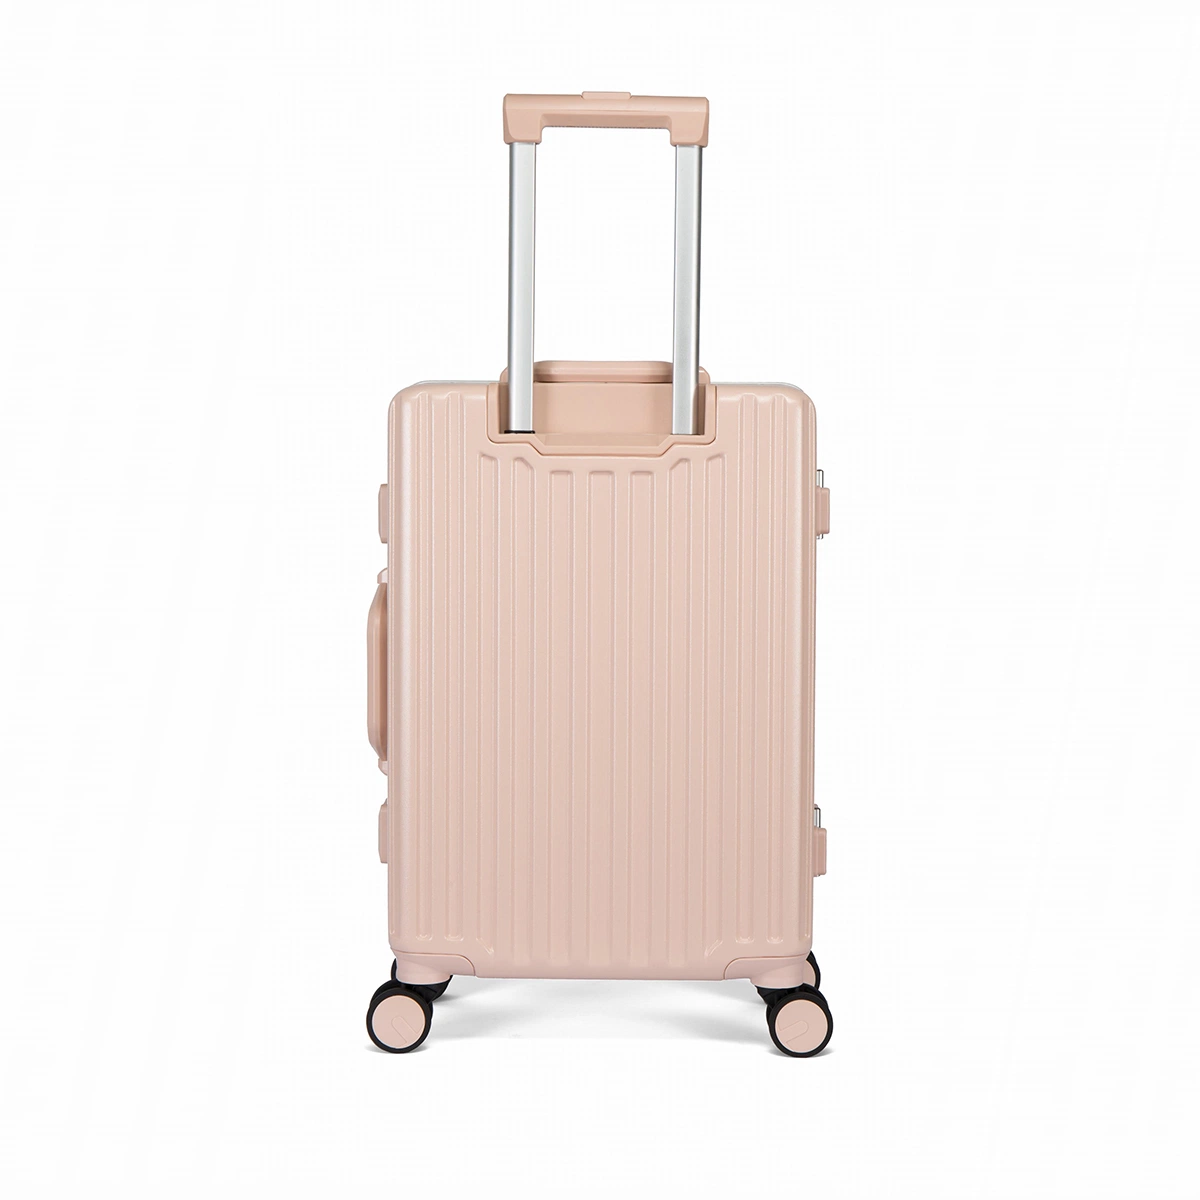 Custom Designer Hard Shell Travel Bags Case 3 Piece Carry on ABS Trolley Suitcases Luggage Sets